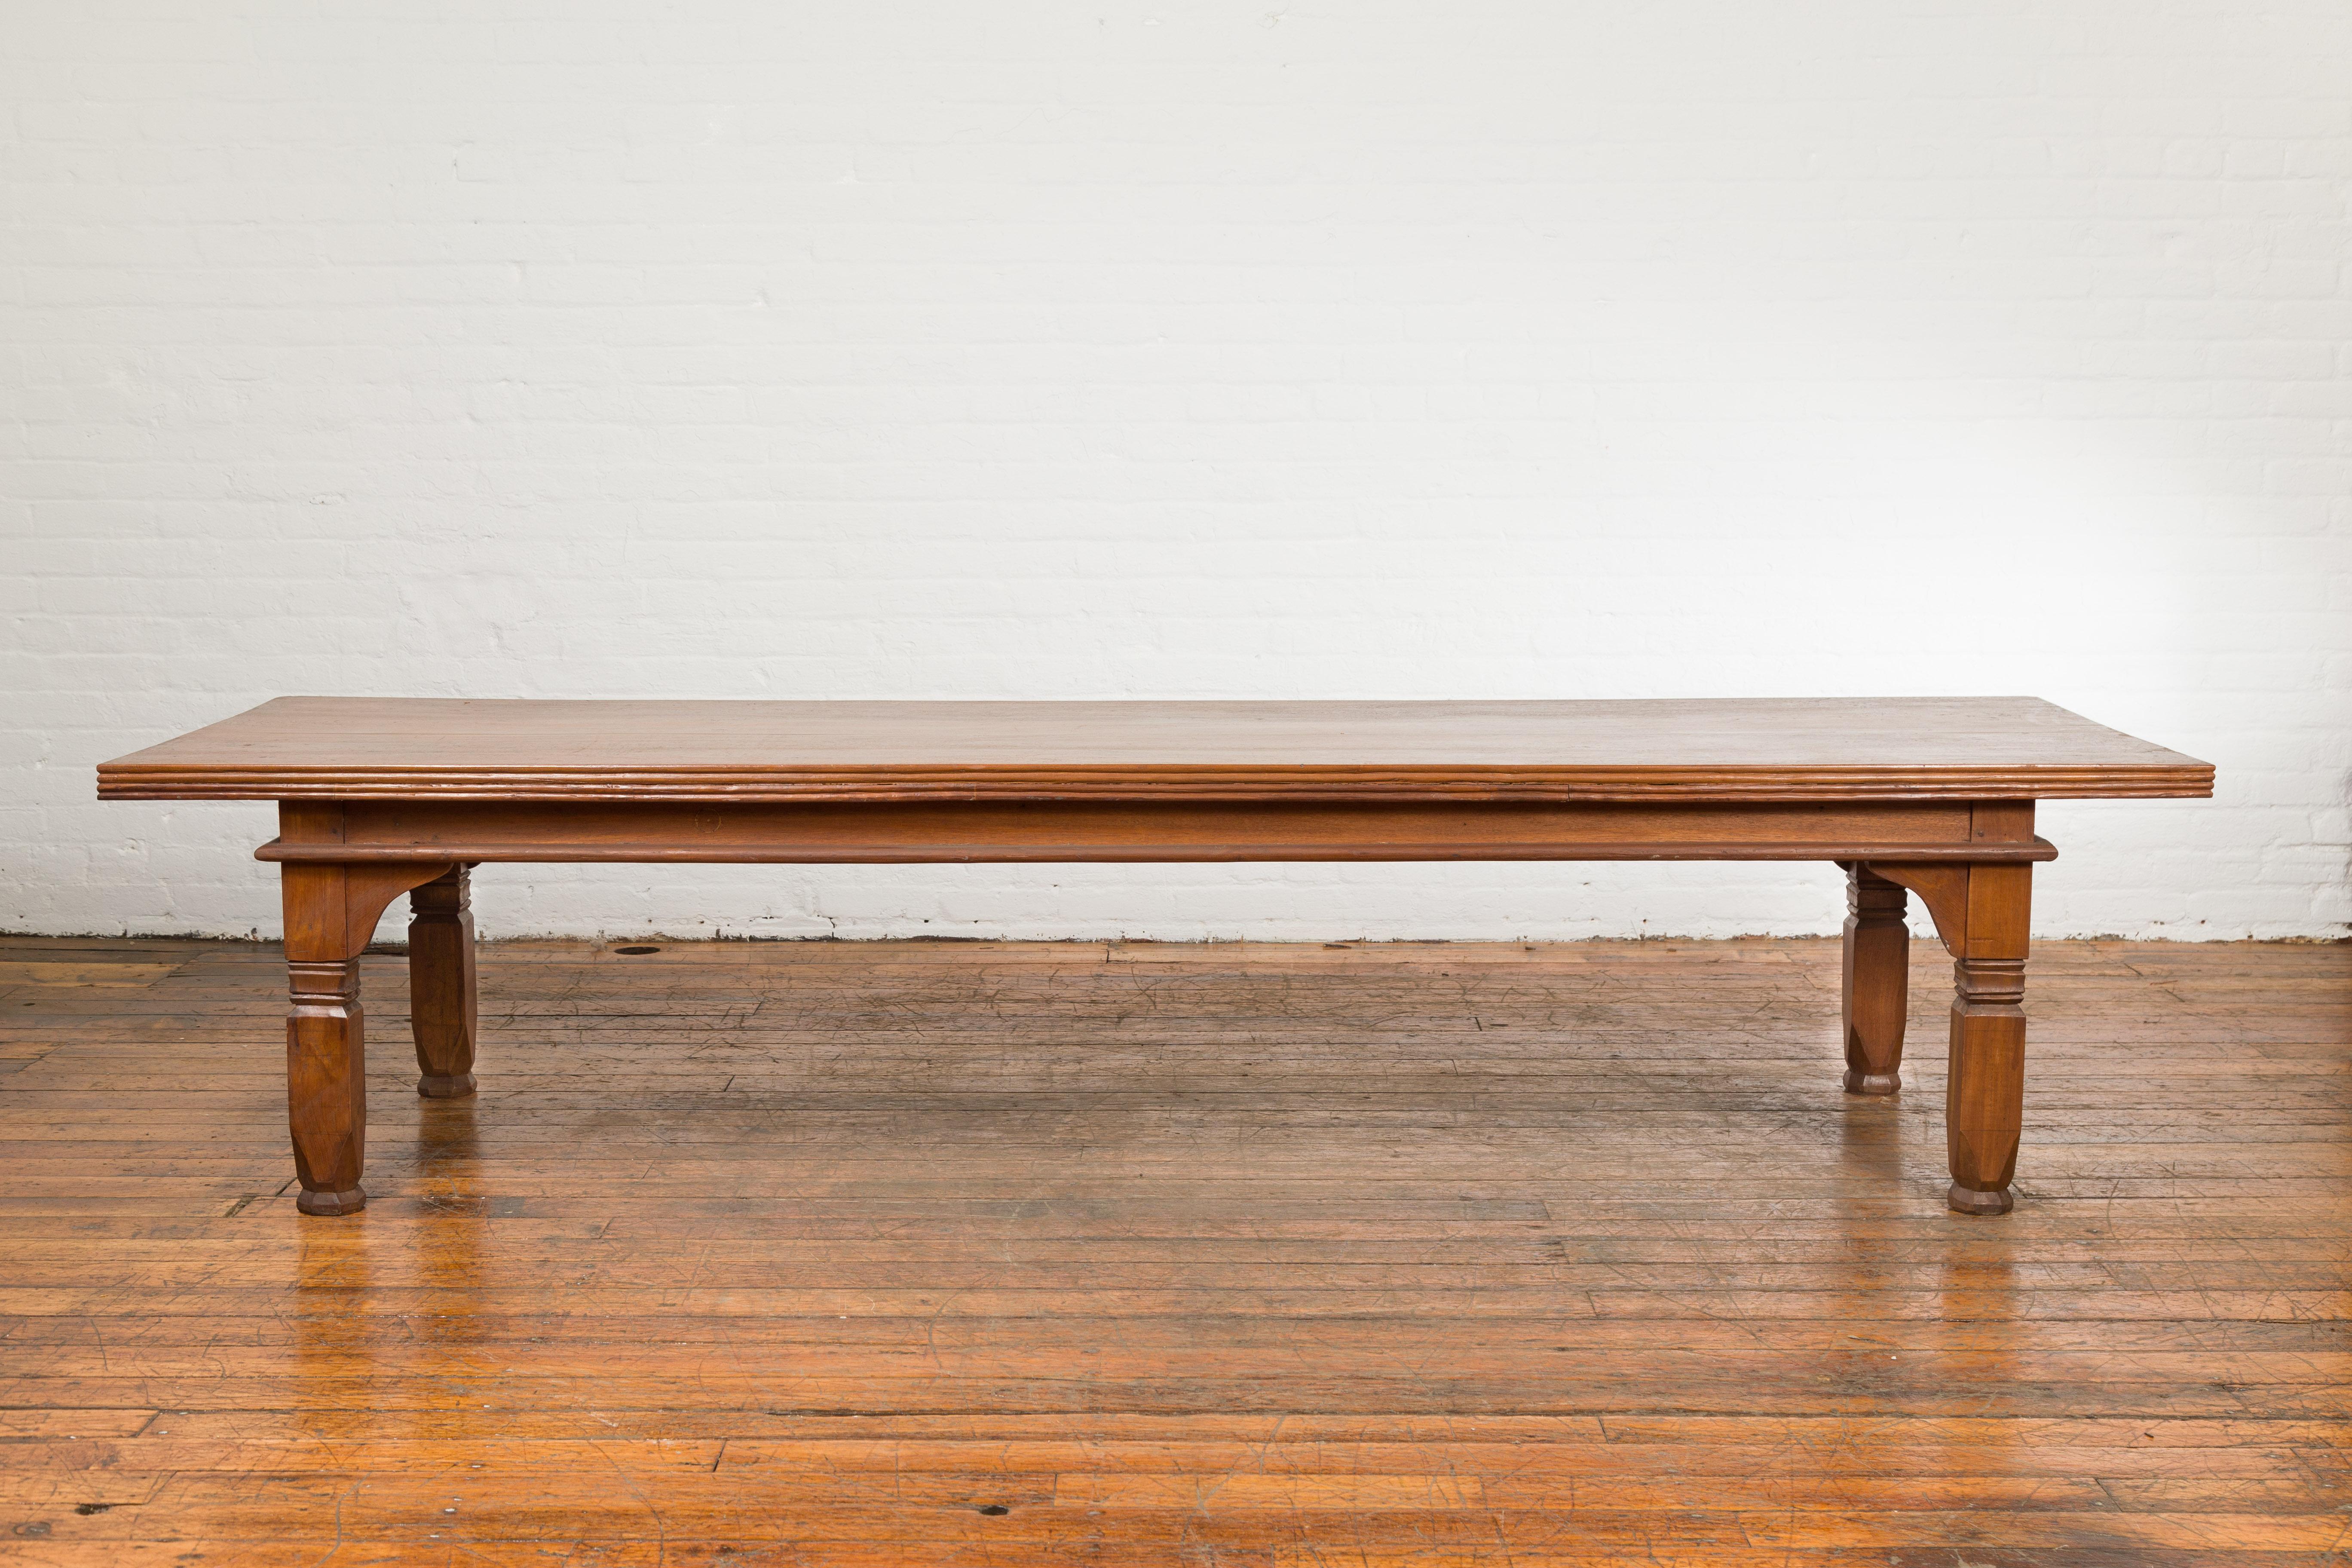 An oversized Indonesian coffee table from the 19th century, with reeded accents and carved legs. Created in Indonesia during the 19th century, this Indonesian coffee table features a rectangular planked top with reeded motifs on the edge, sitting